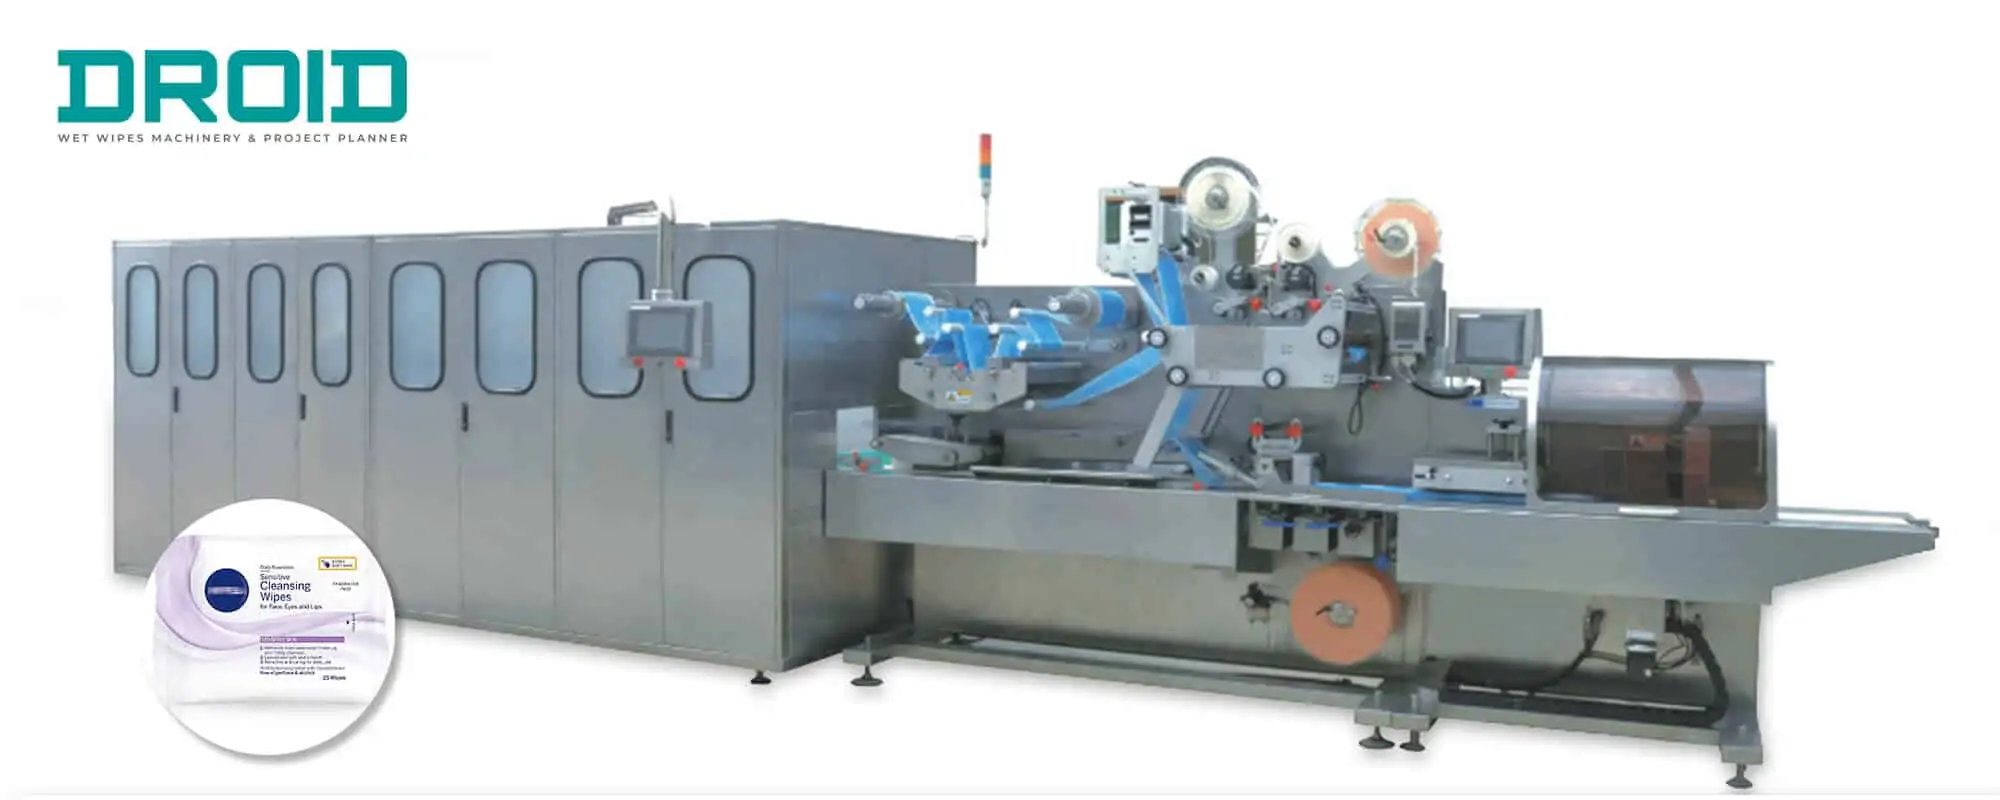 wet wipes machine - Are you looking for Disinfectant Wipes Making Machines?